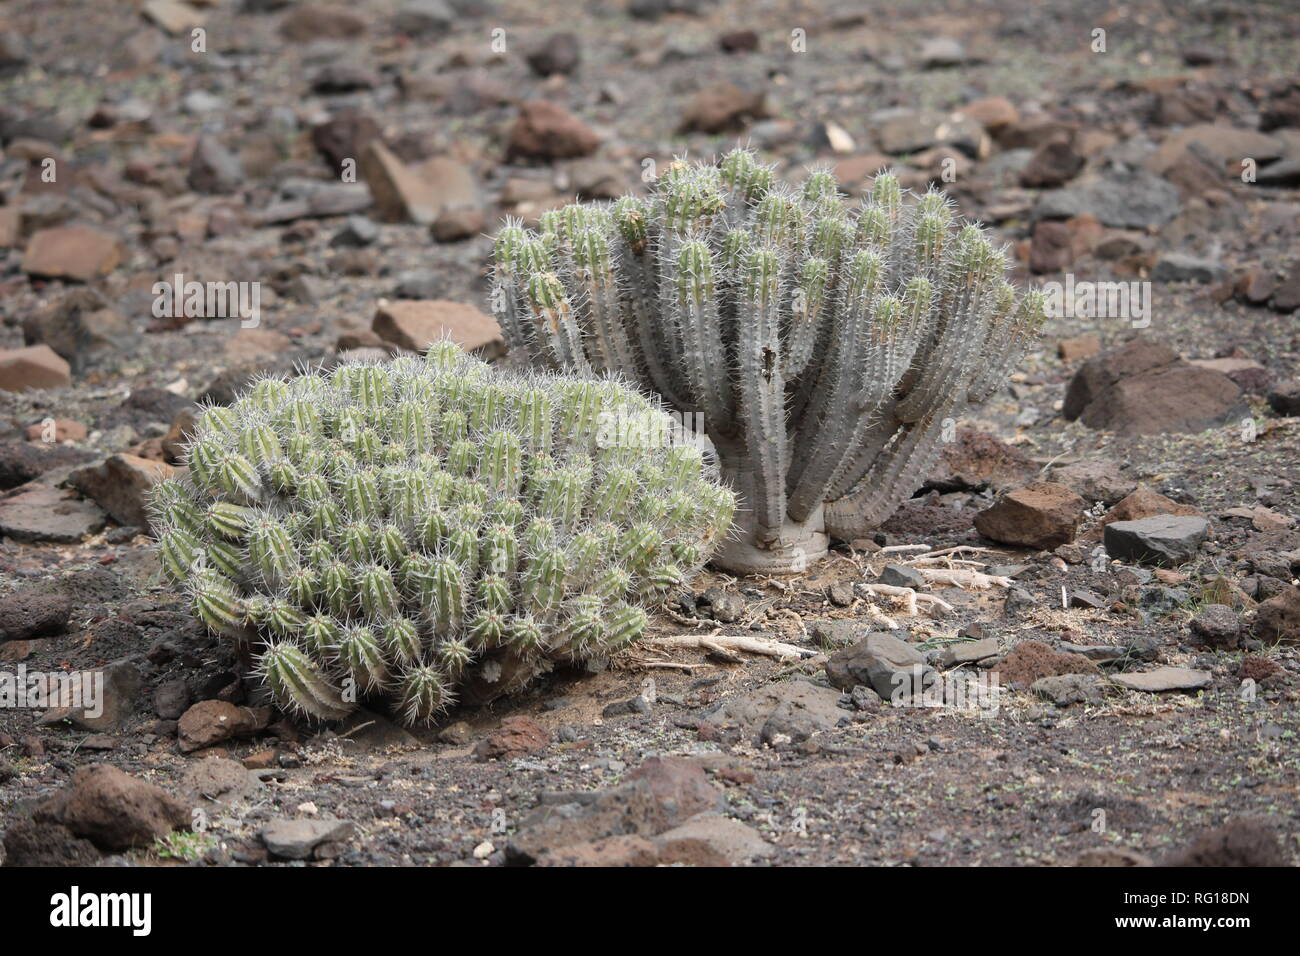 Euphorbia handiensis growing in the Jandia Nature Reserve near the town of Morro Jable, Fuerteventura. Stock Photo